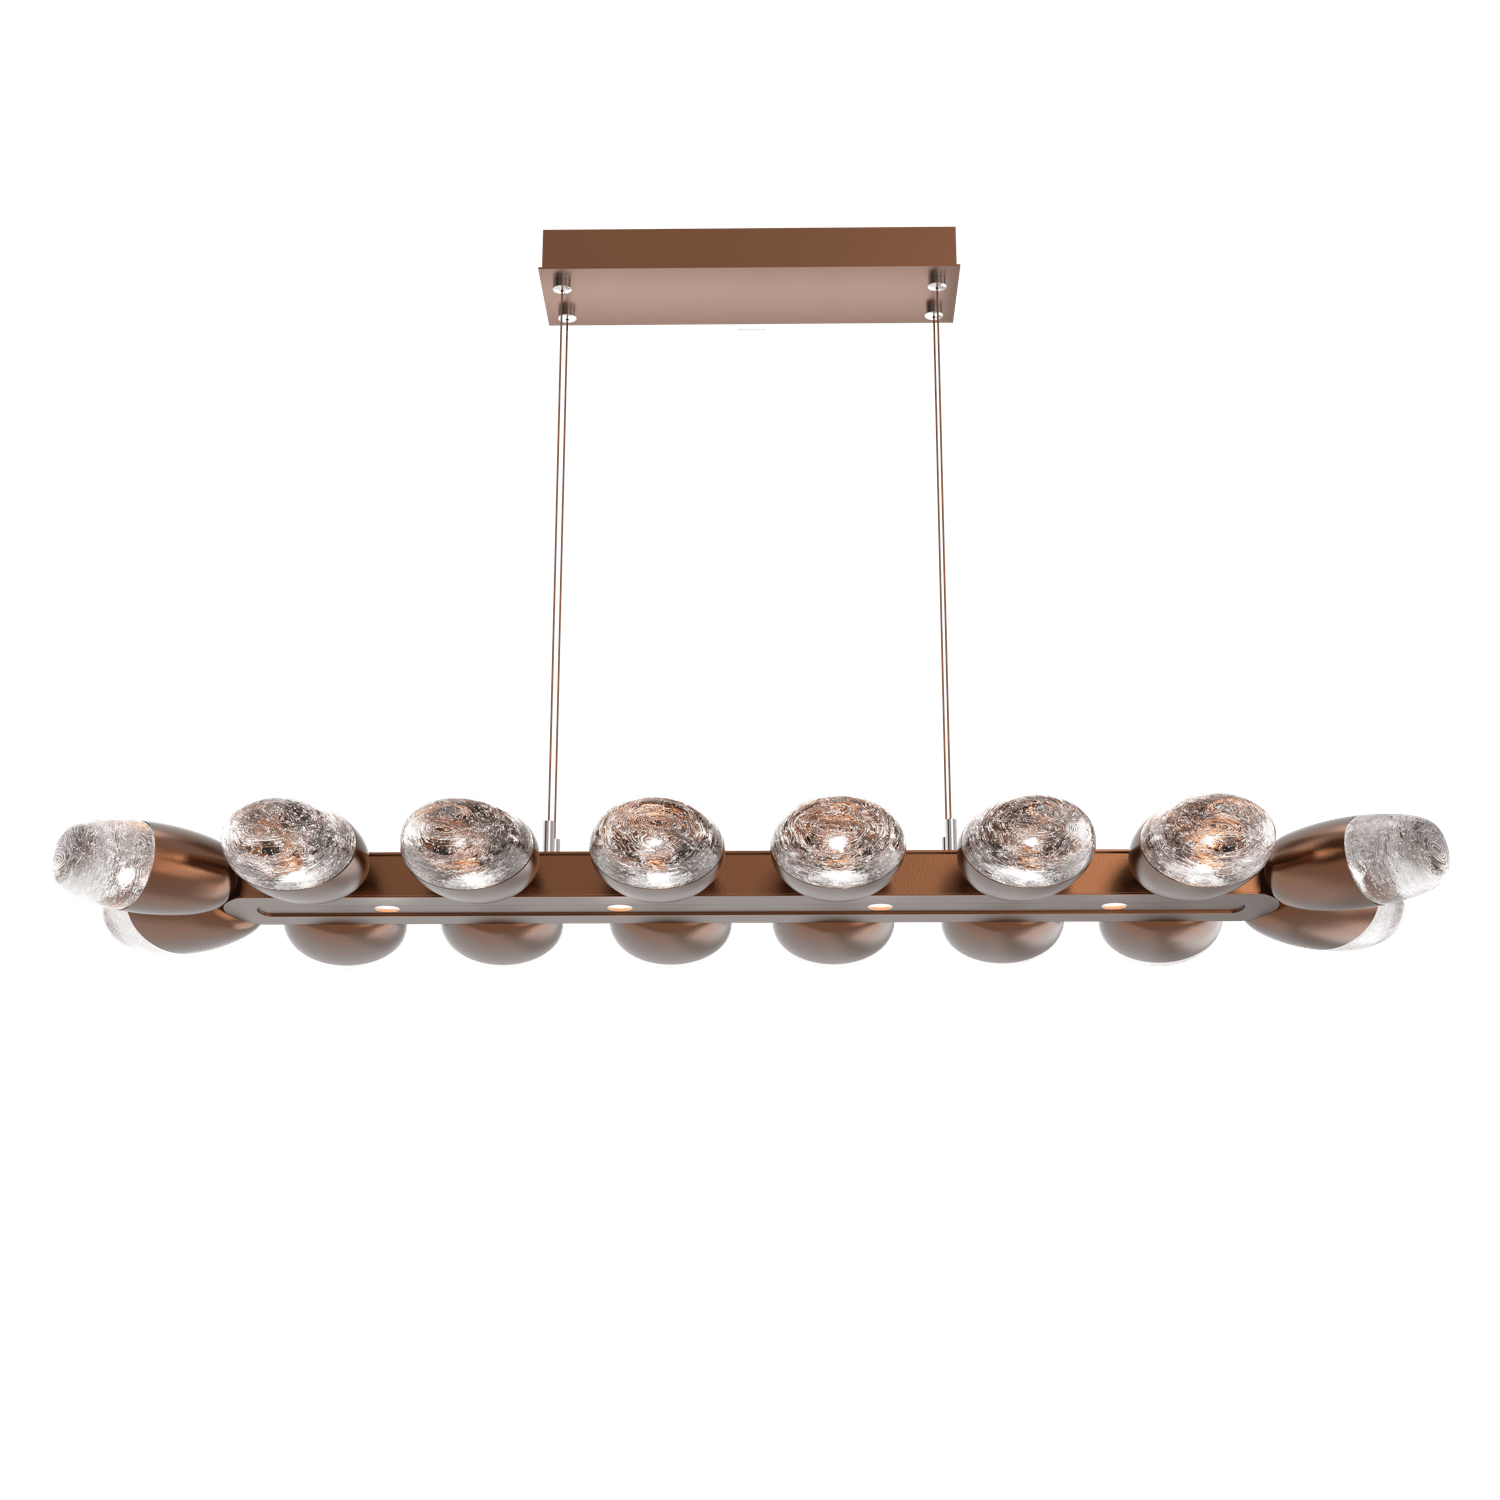 PLB0079-48-BB-Hammerton-Studio-Pebble-48-inch-linear-chandelier-with-burnished-bronze-finish-and-clear-cast-glass-shades-and-LED-lamping